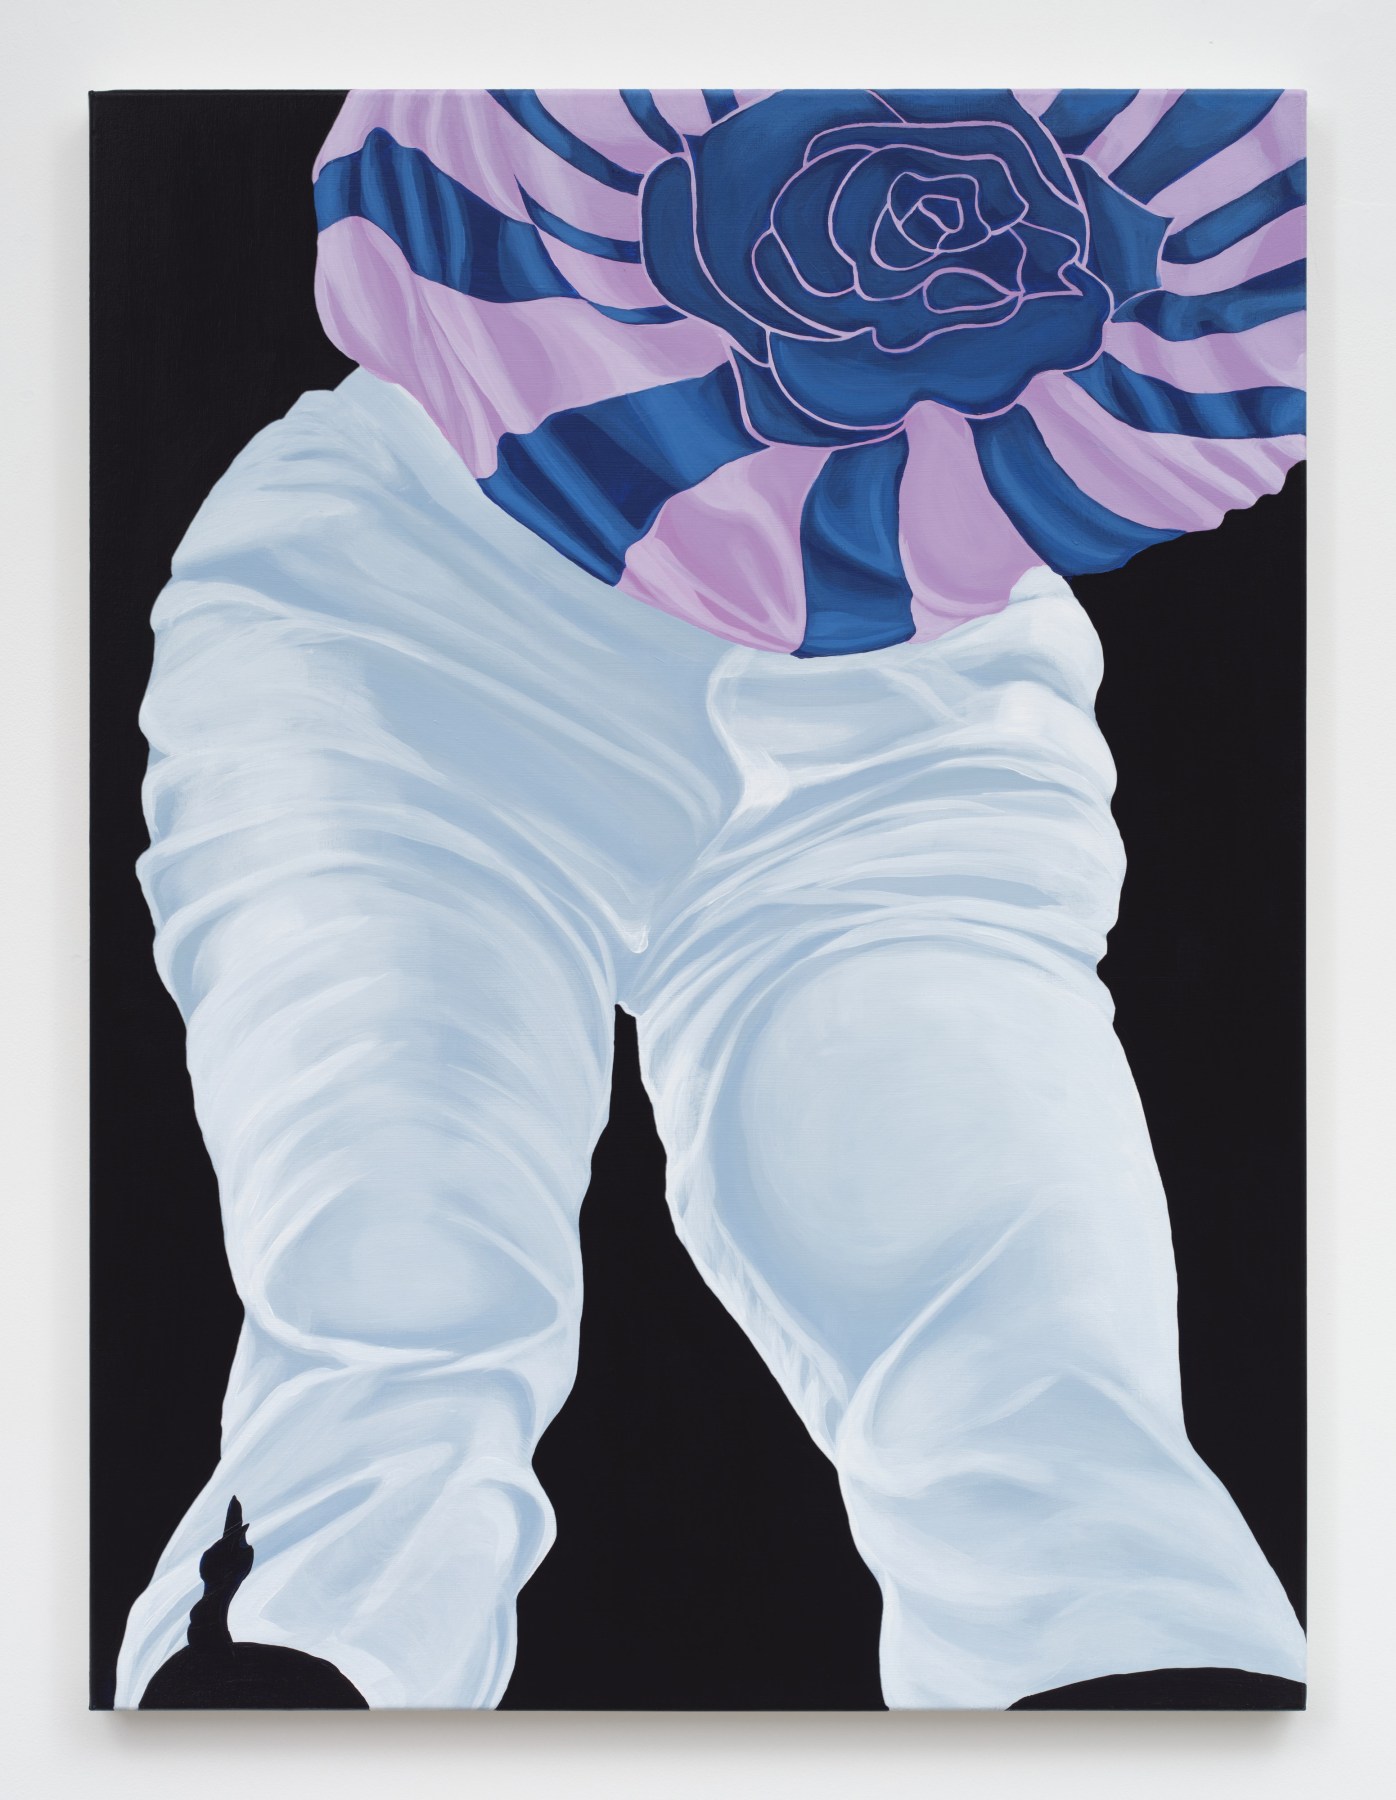 A painting depicting the legs and torso of a jockey wearing white pants and a lavender and blue striped silk with a blue rose against a black background. 